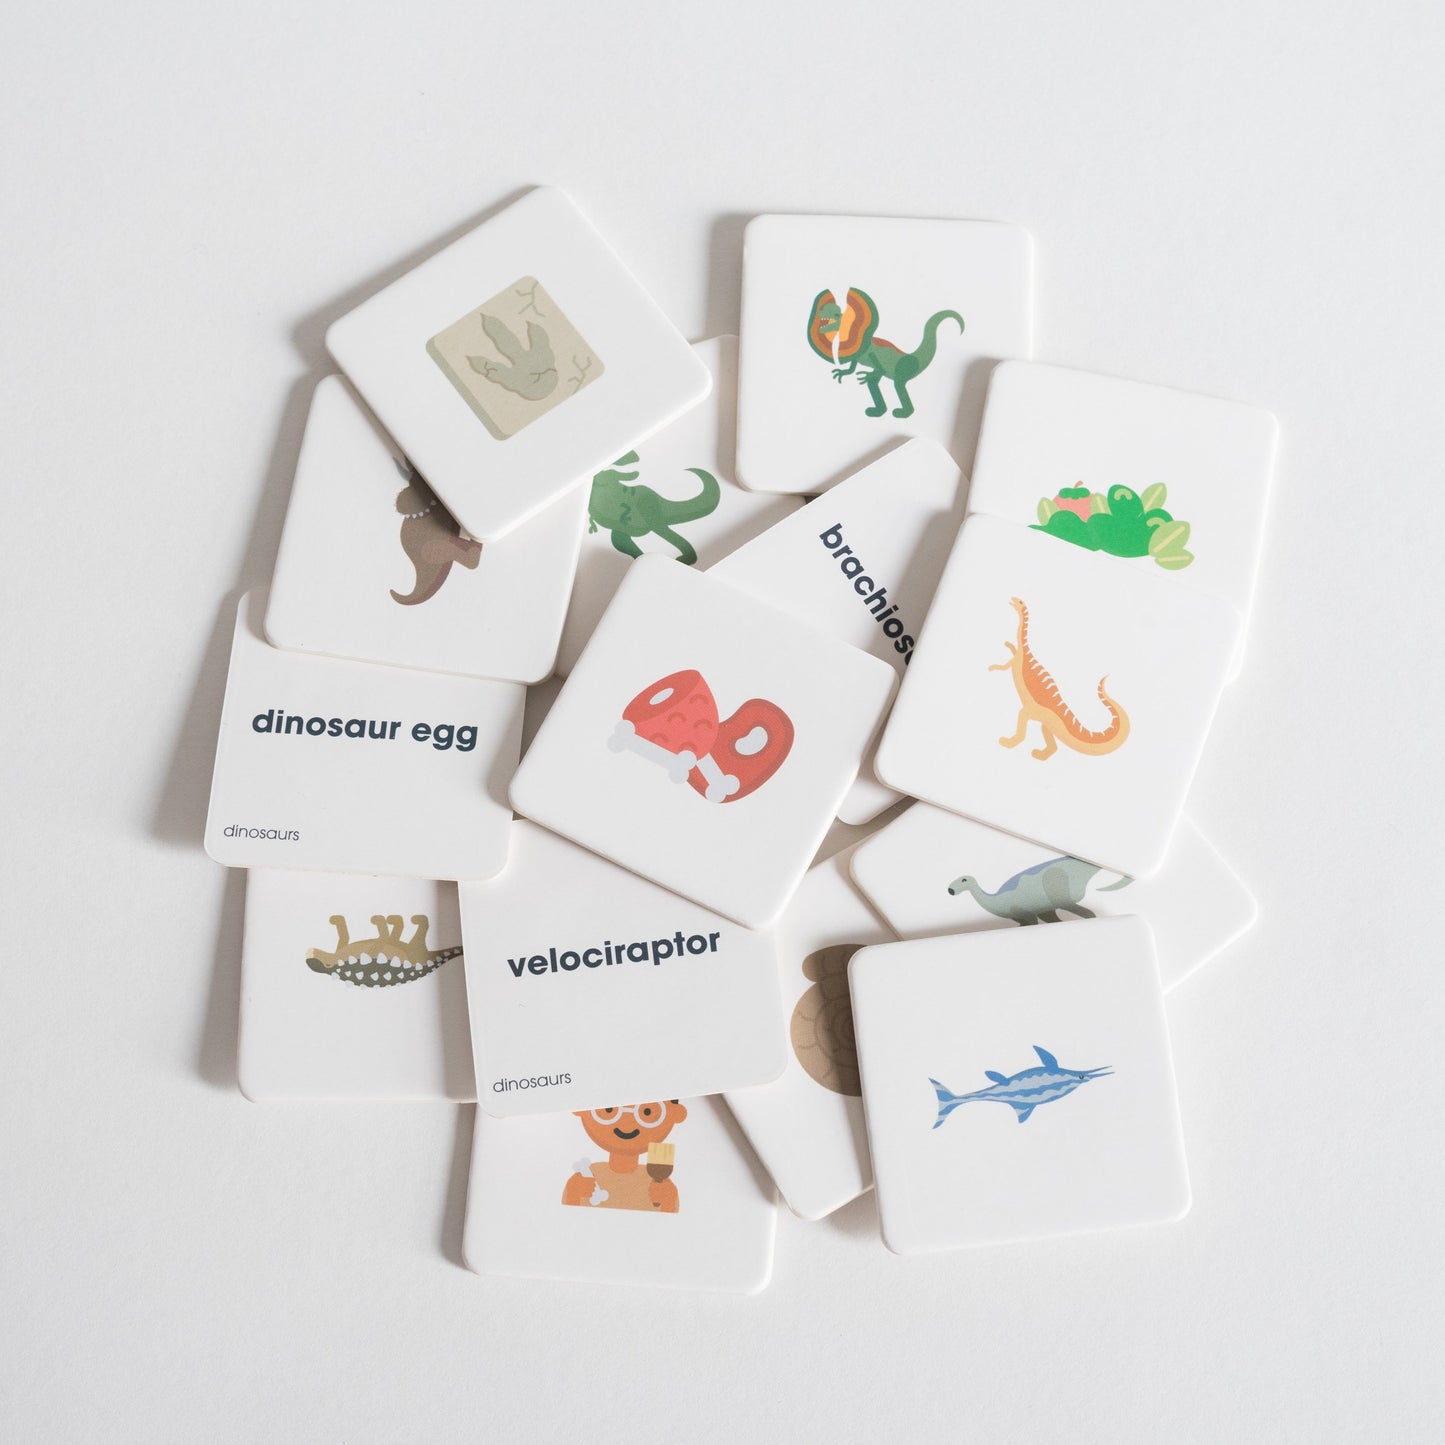 Dinosaurs Pack tiles arranged loosely in a pile on white background